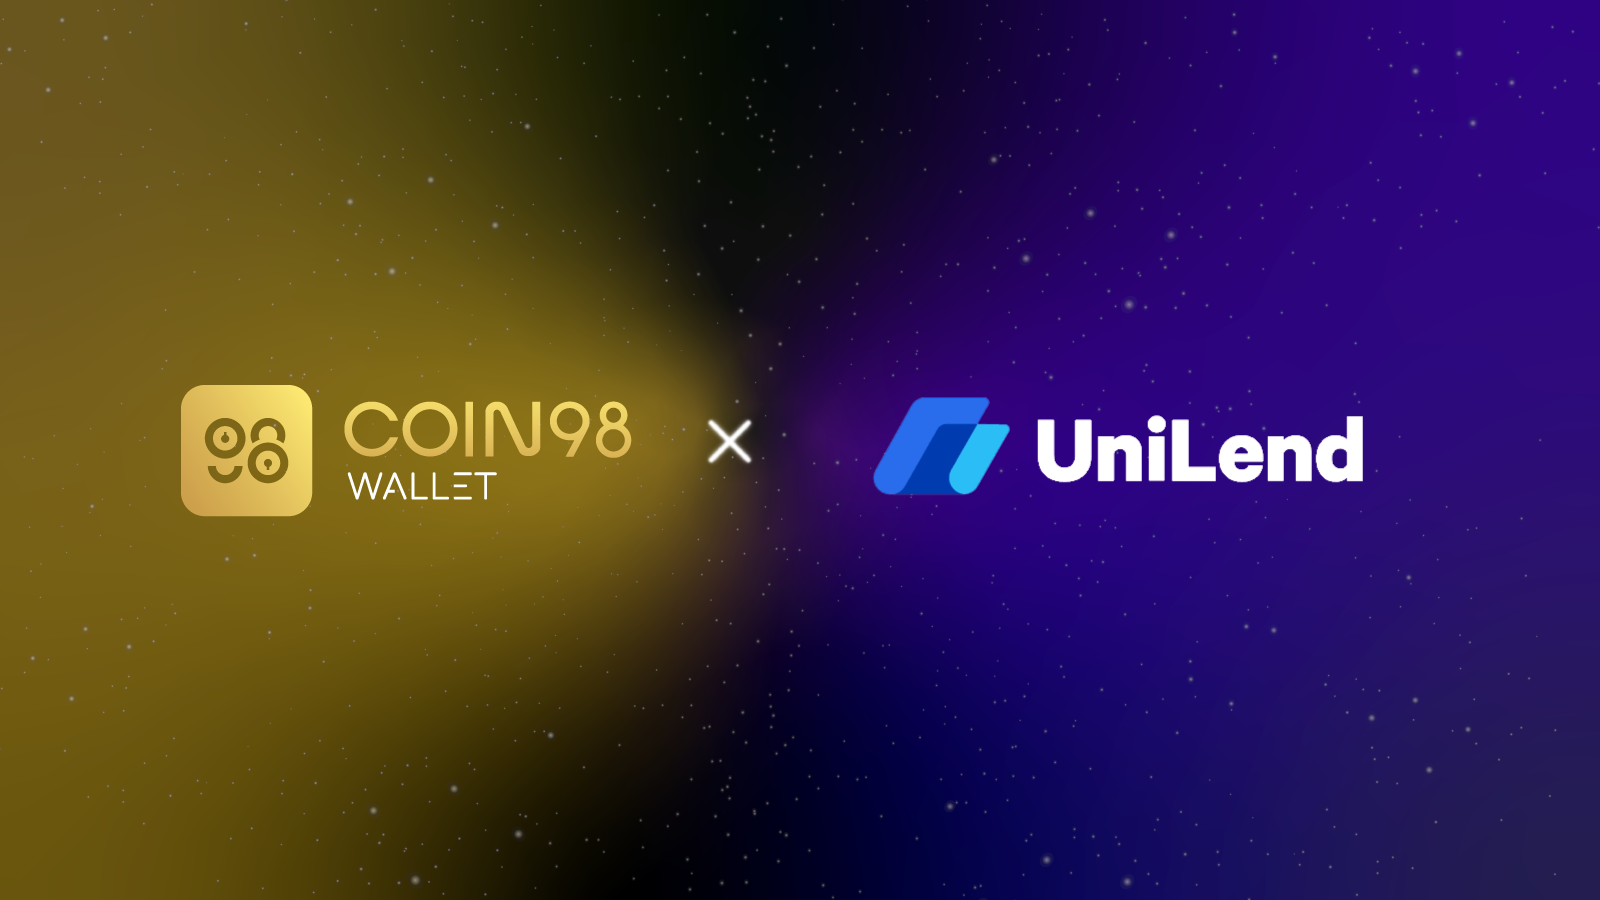 Coin98 Wallet partners with Unilend Finance, revealing a seamless user experience for Defi 2.0